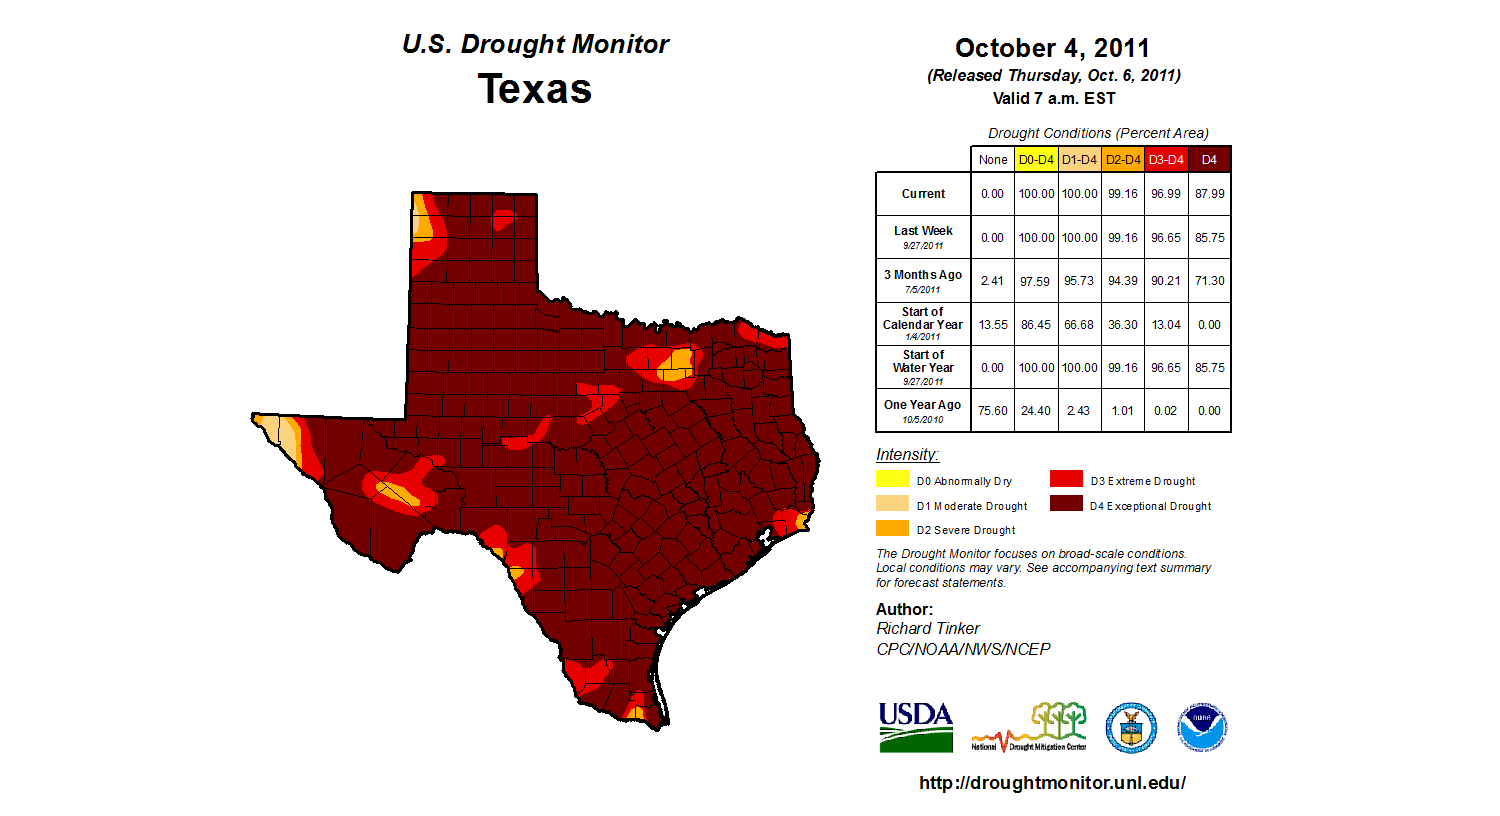 Map of Texas showing the extent of the 2011 drought on October 4, 2011. Nearly all of the state is classified as the highest level of drought, Exception Drought, indicated by a deep red-brown color.